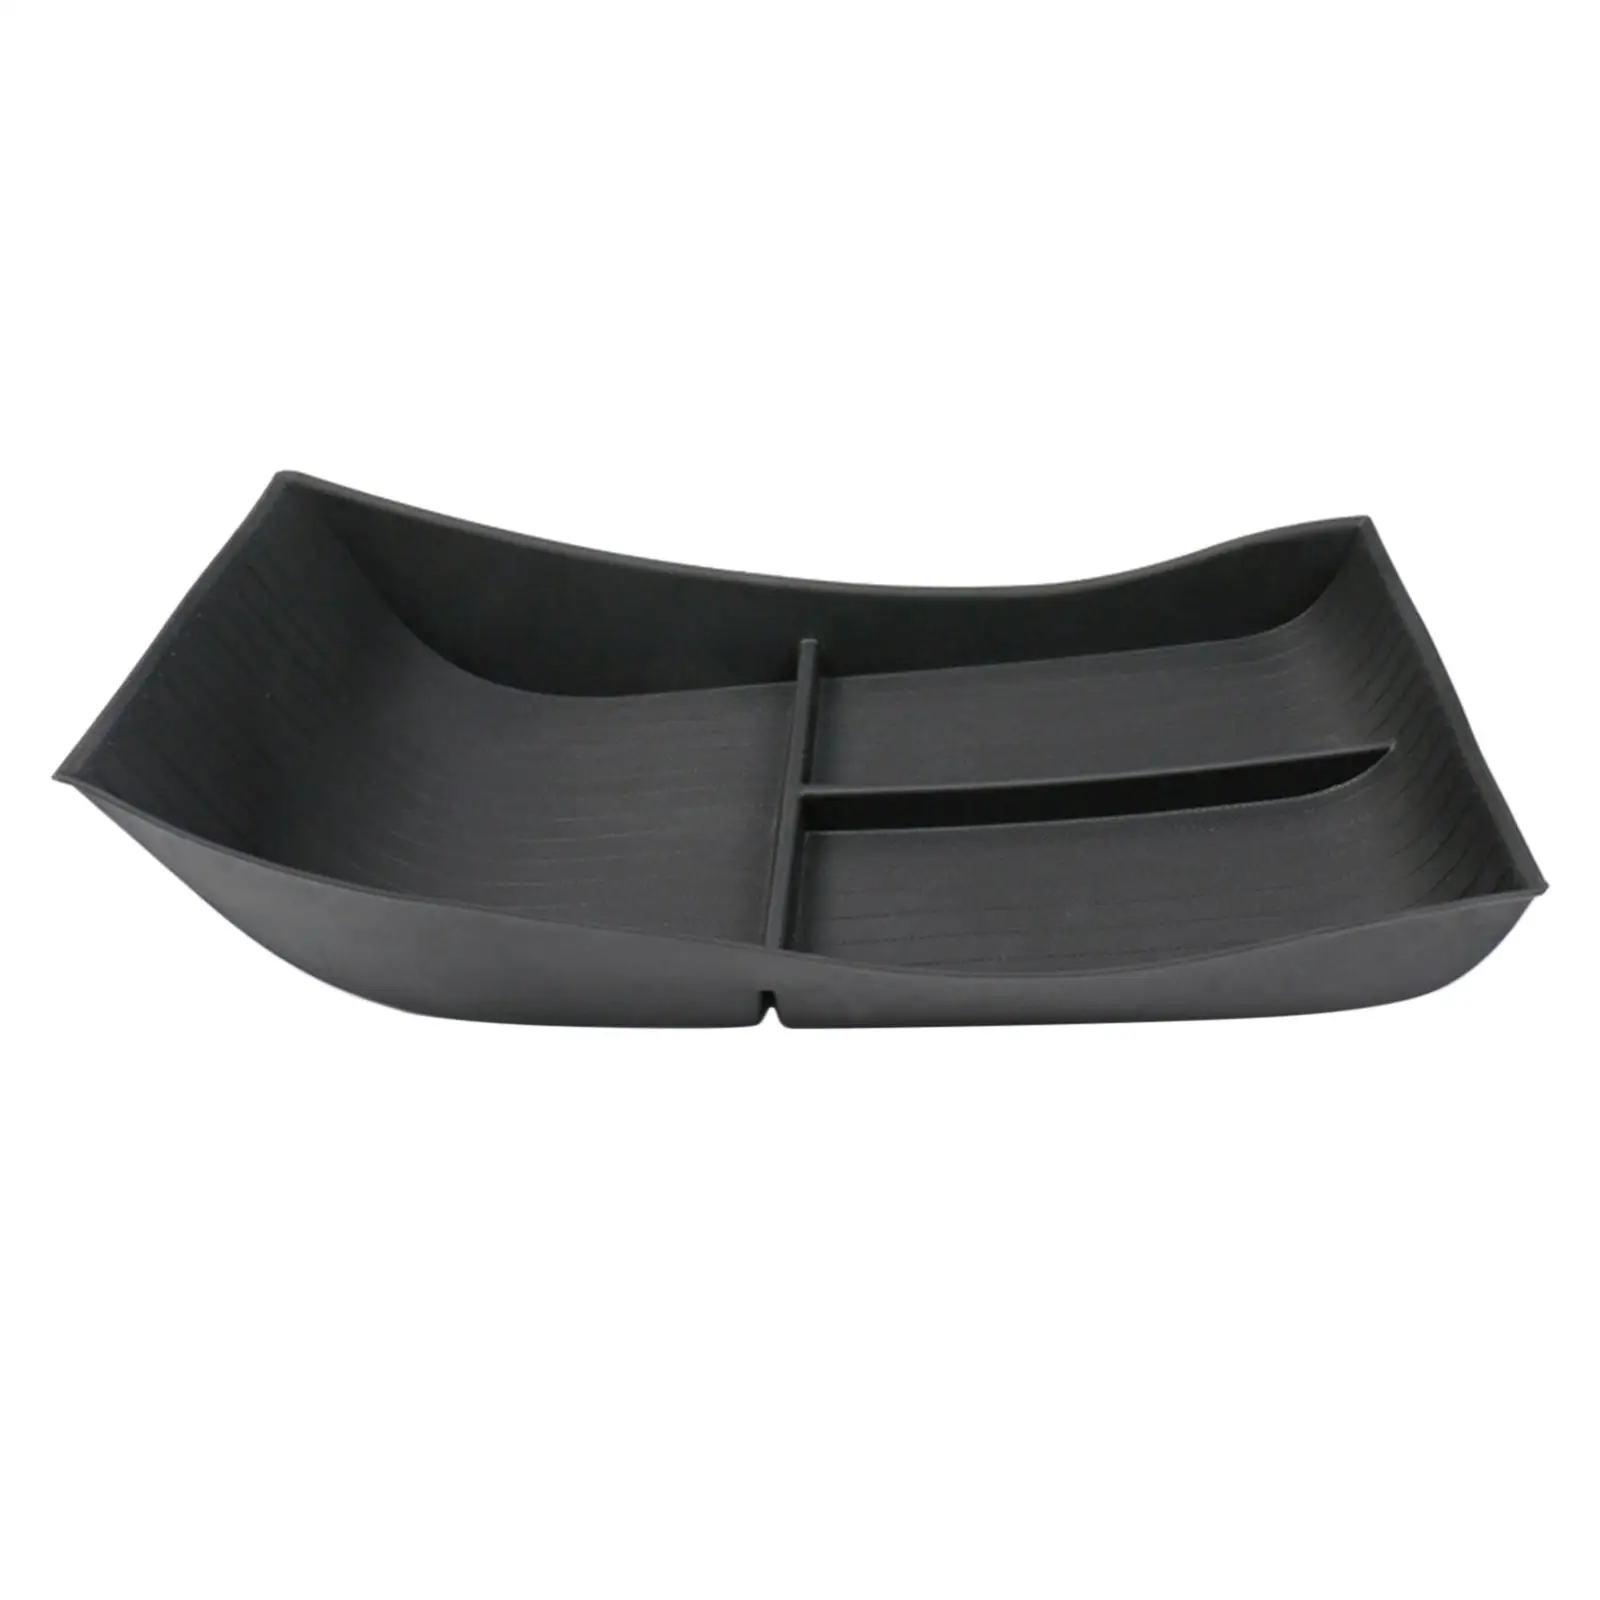 Console Lower Organizer for Byd Seal Replace High Quality